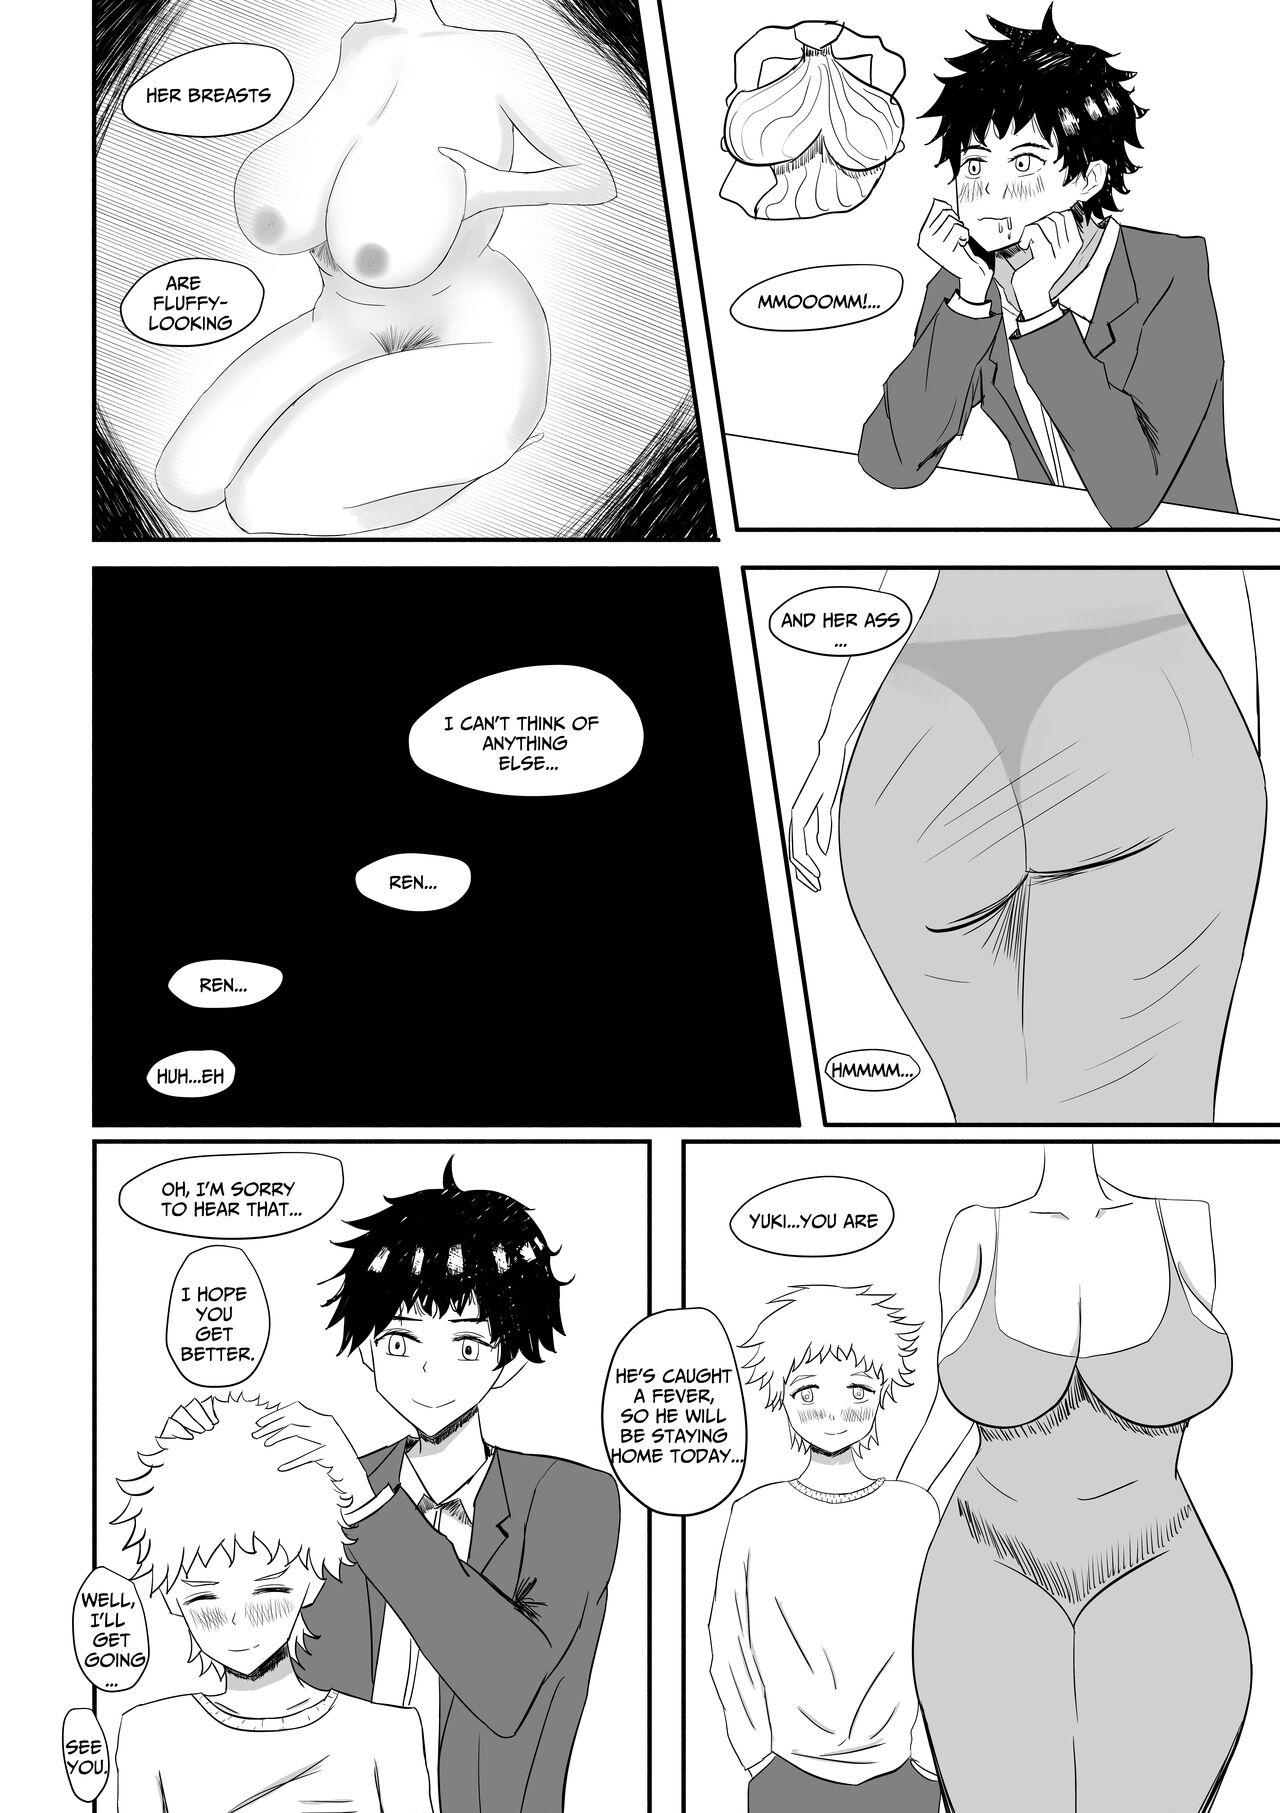 Babysitter Mom and Brother 2.1 ongoing Deutsch - Page 3